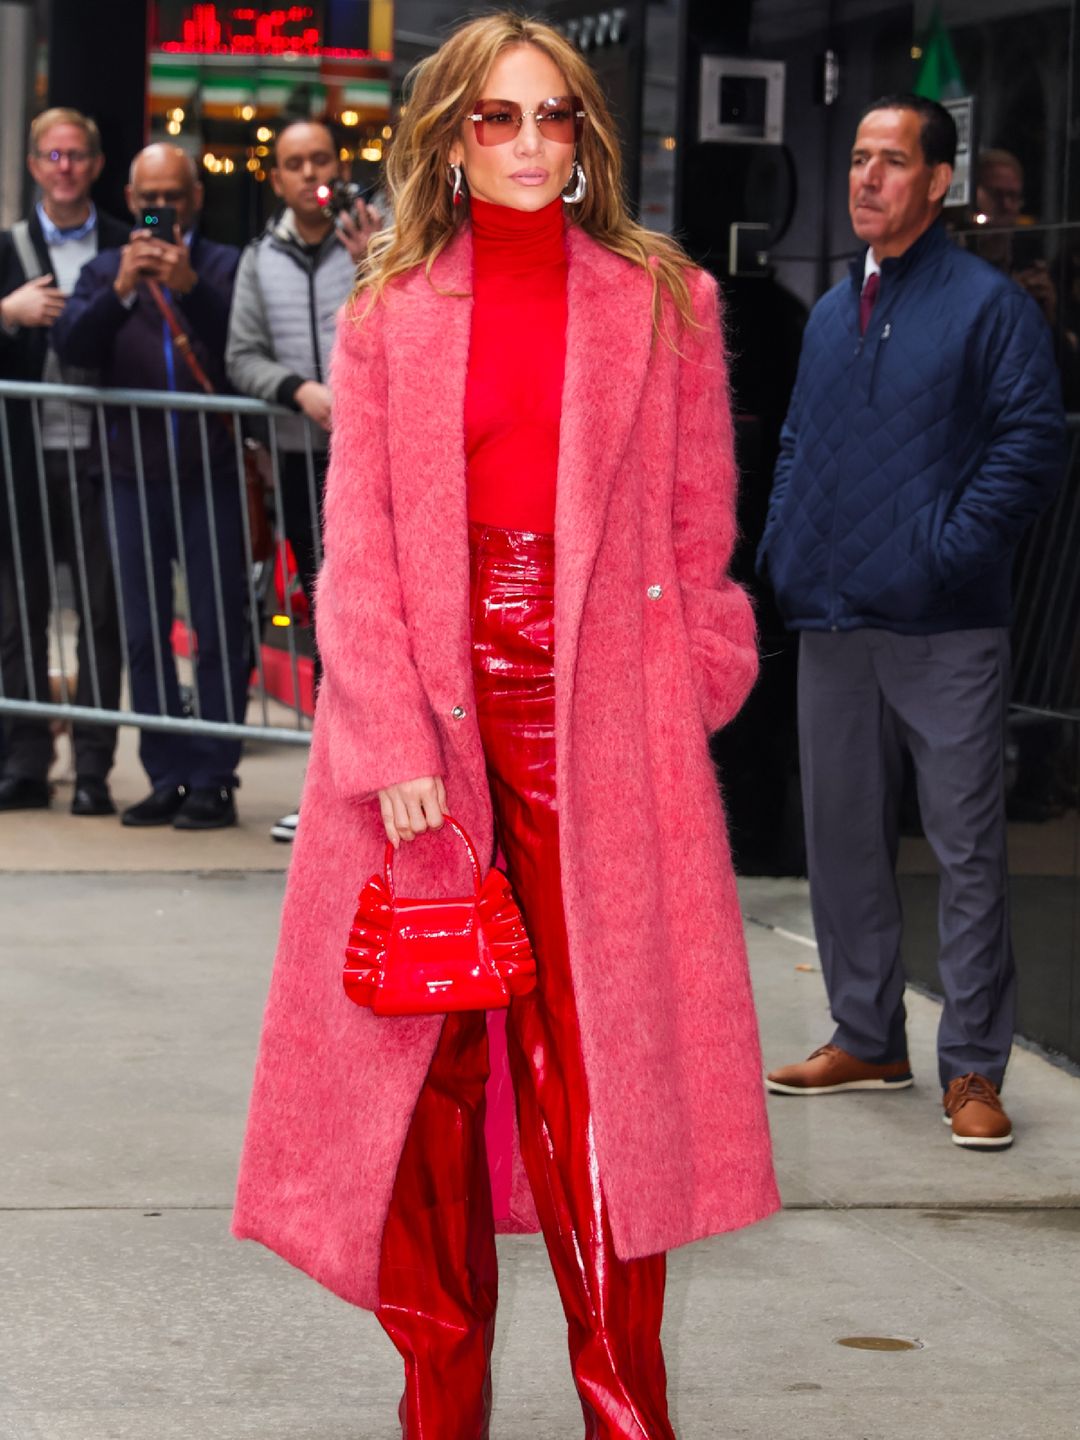 Jennifer Lopez is seen arriving at 'Good Morning America' on May 6, 2024 in New York wearing red trousers, a red turtleneck and a pink coat